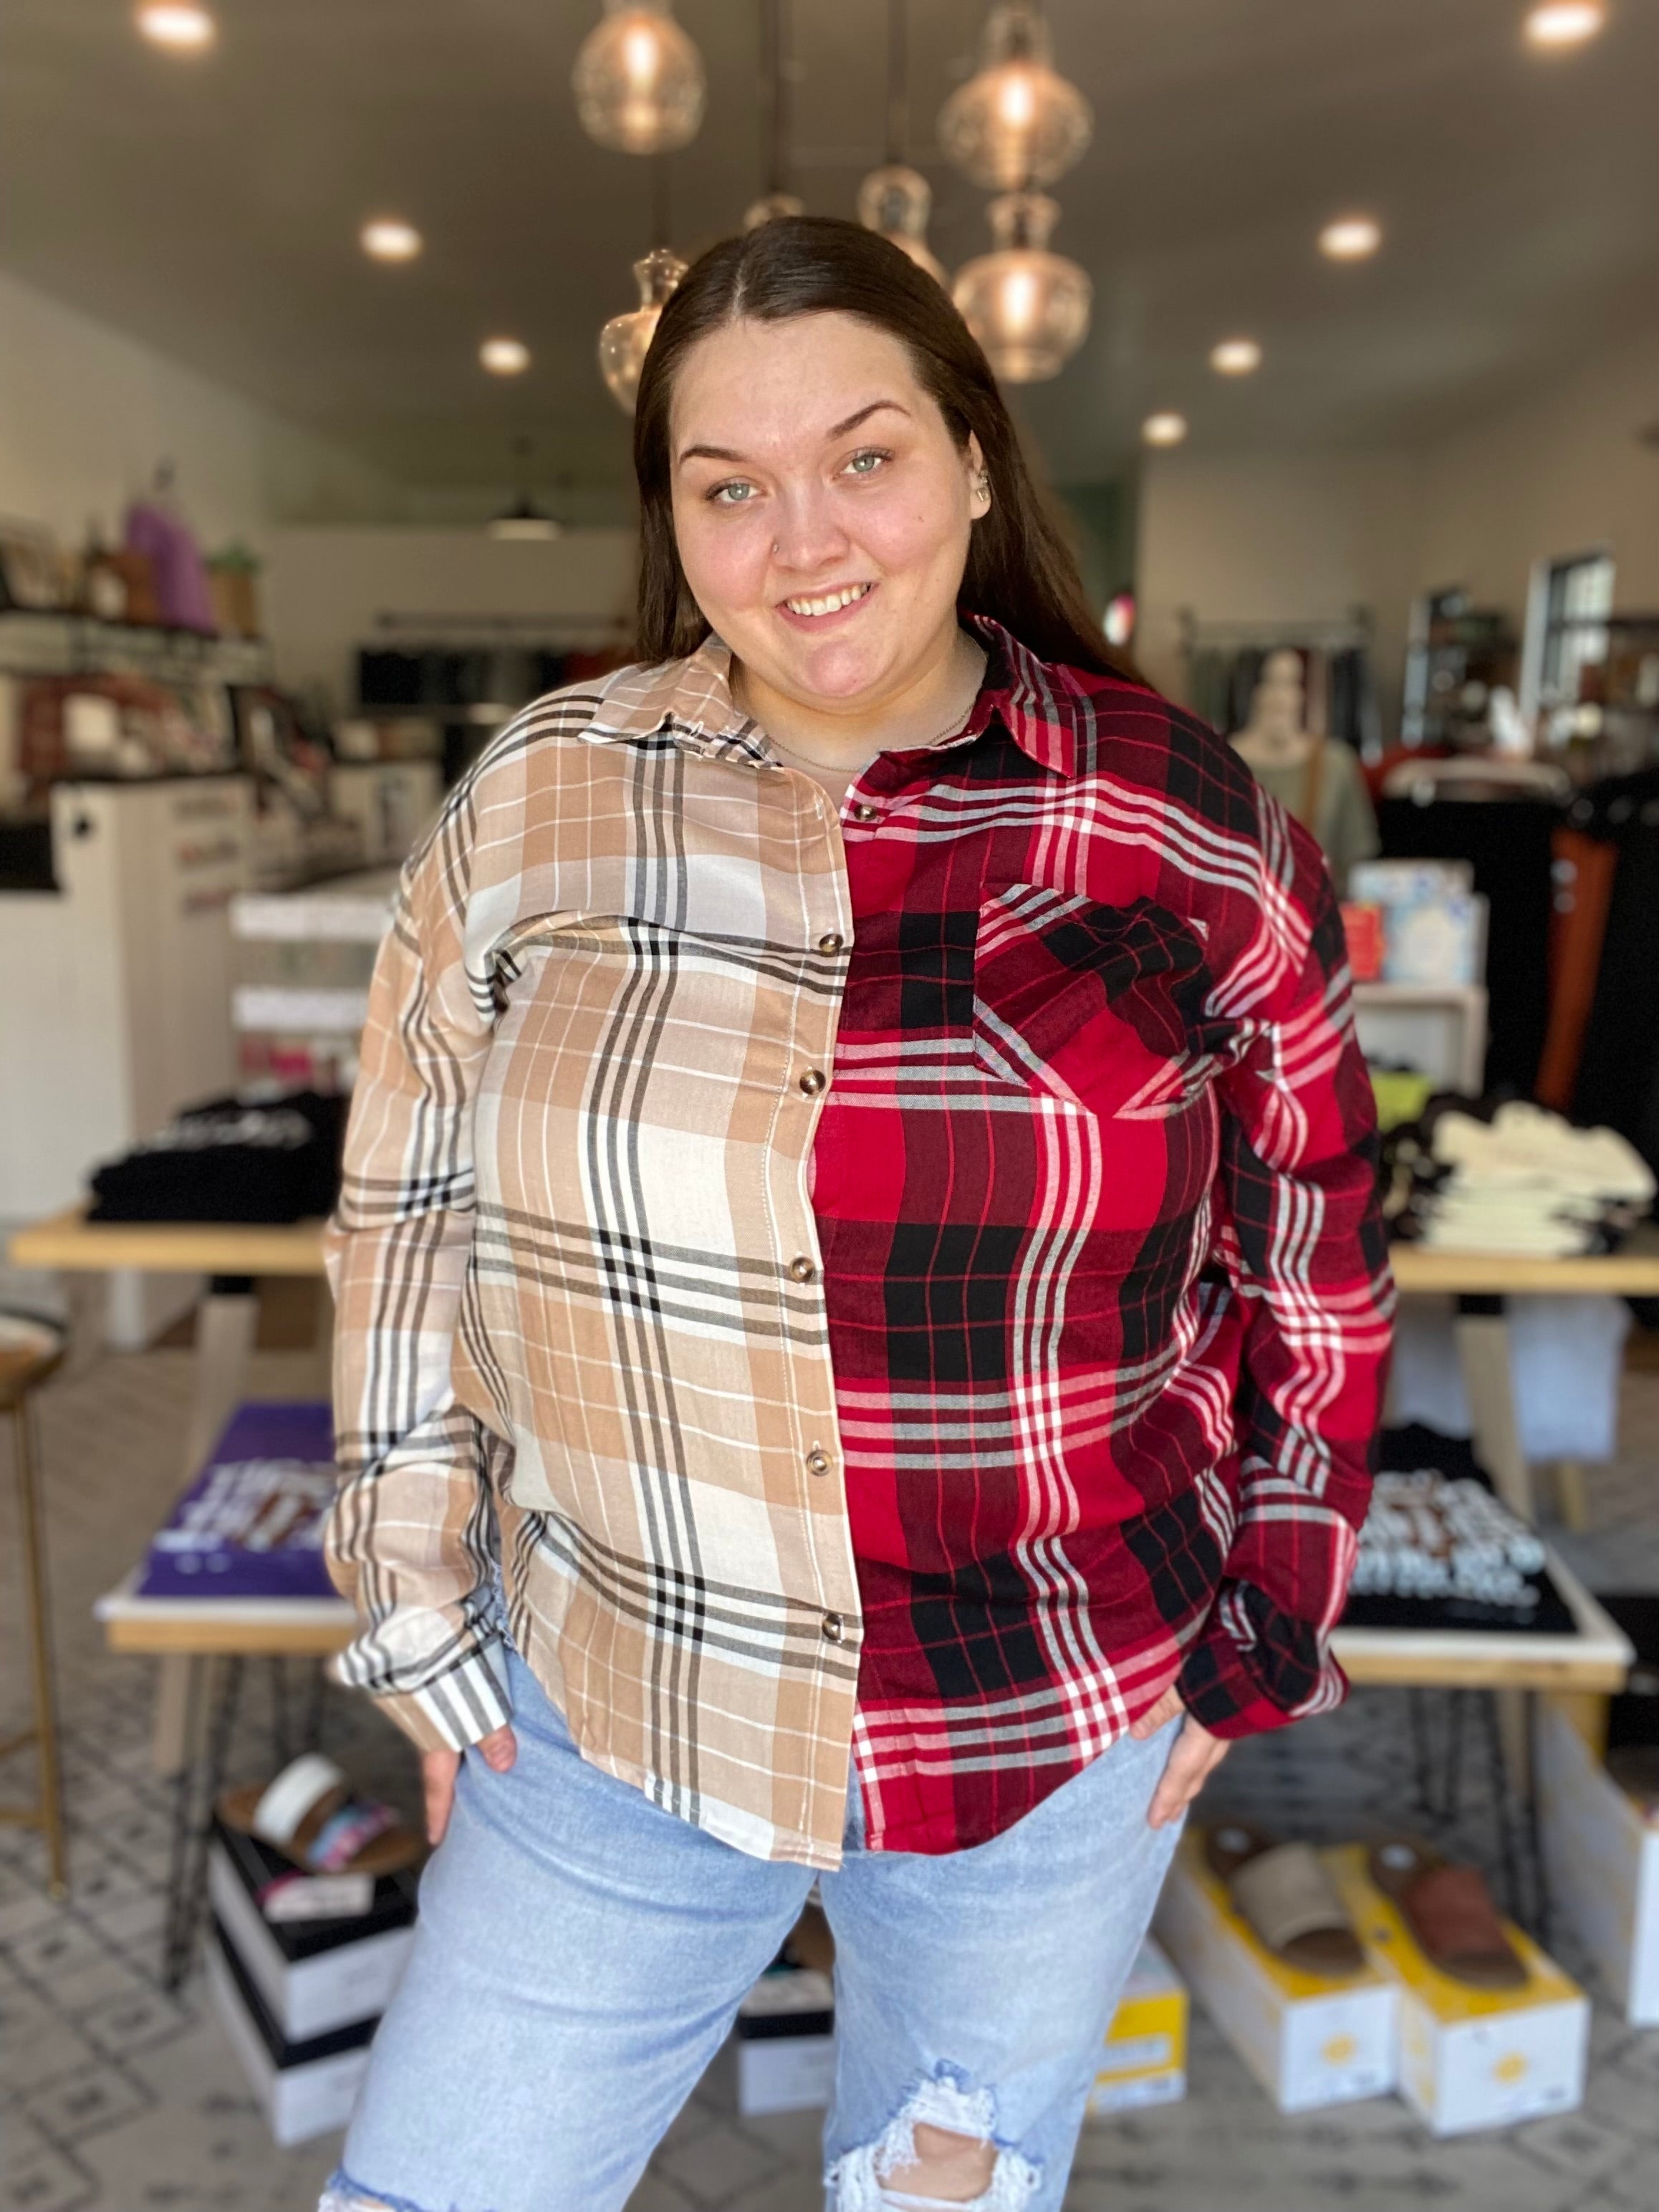 Shop Shades of Fall Plaid Button Down Shirt-Shirts & Tops at Ruby Joy Boutique, a Women's Clothing Store in Pickerington, Ohio